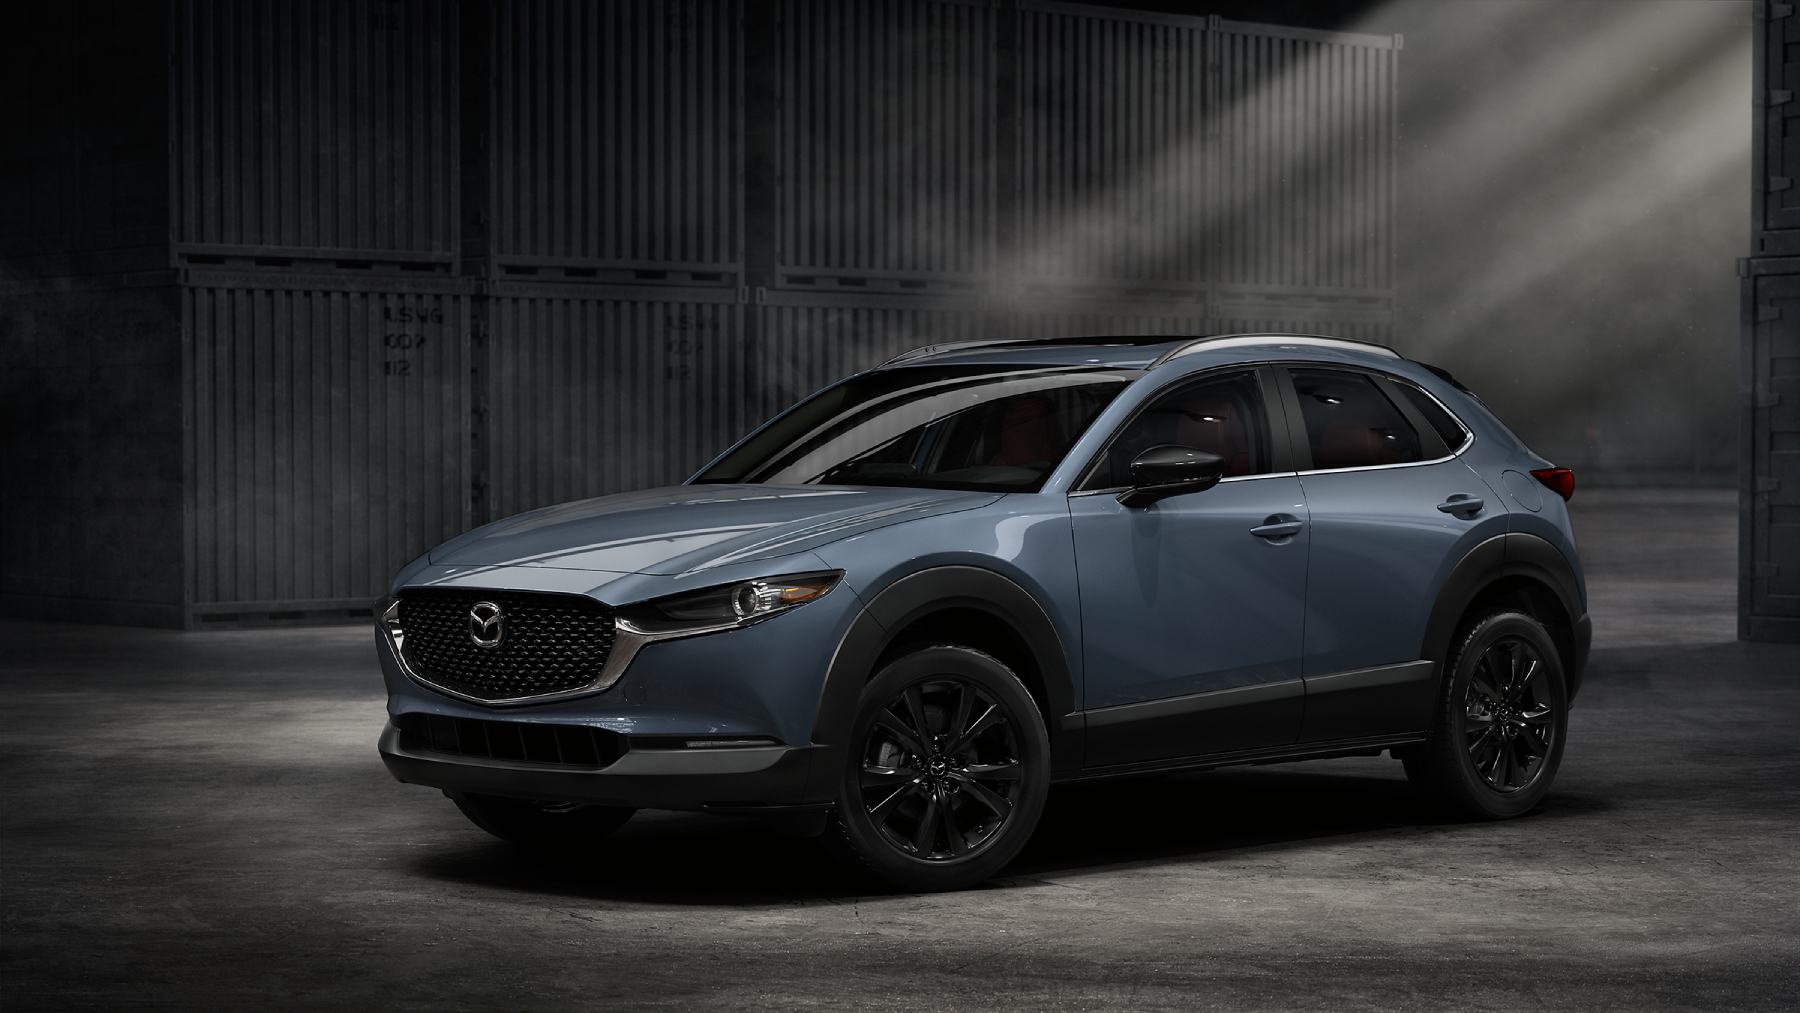 A light blue Mazda CX-30 sits on a photo set with a dark backdrop and dramatic lighting.